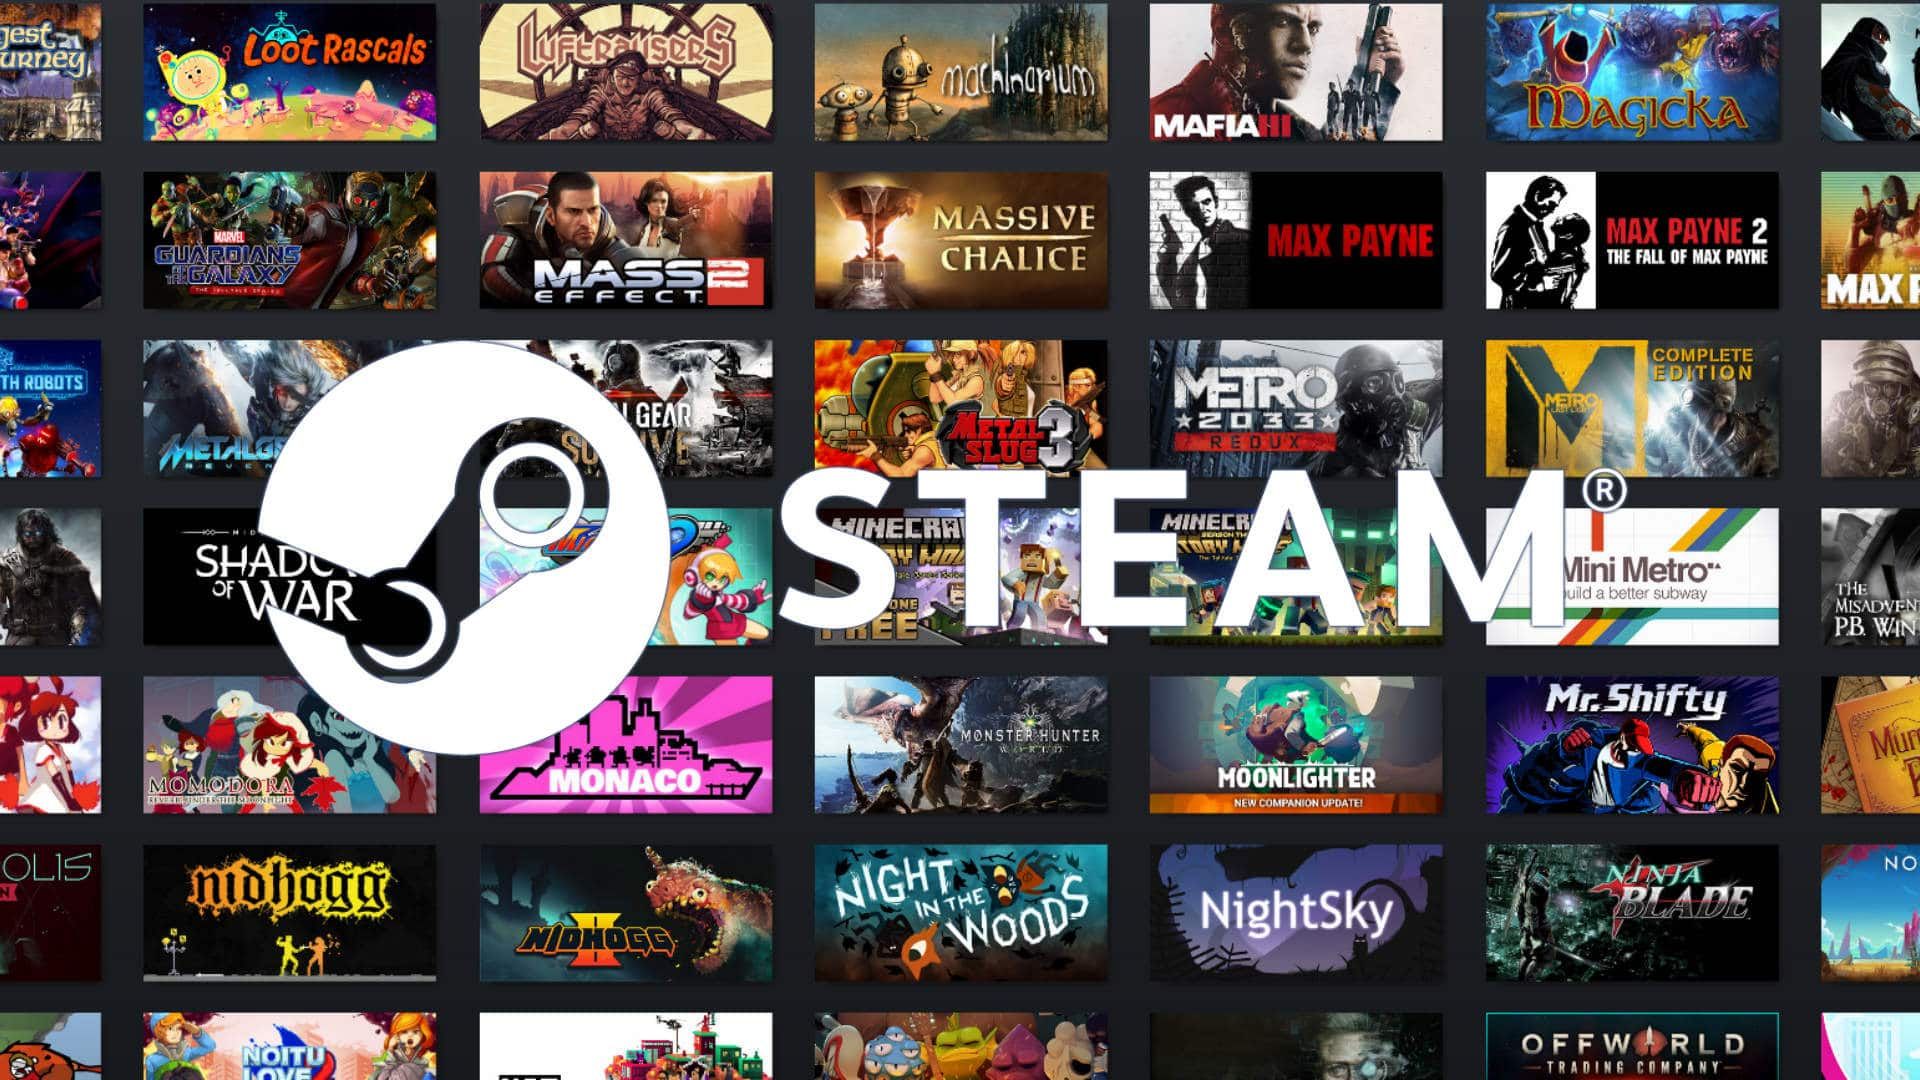 Steam bans award logos and review scores from game images